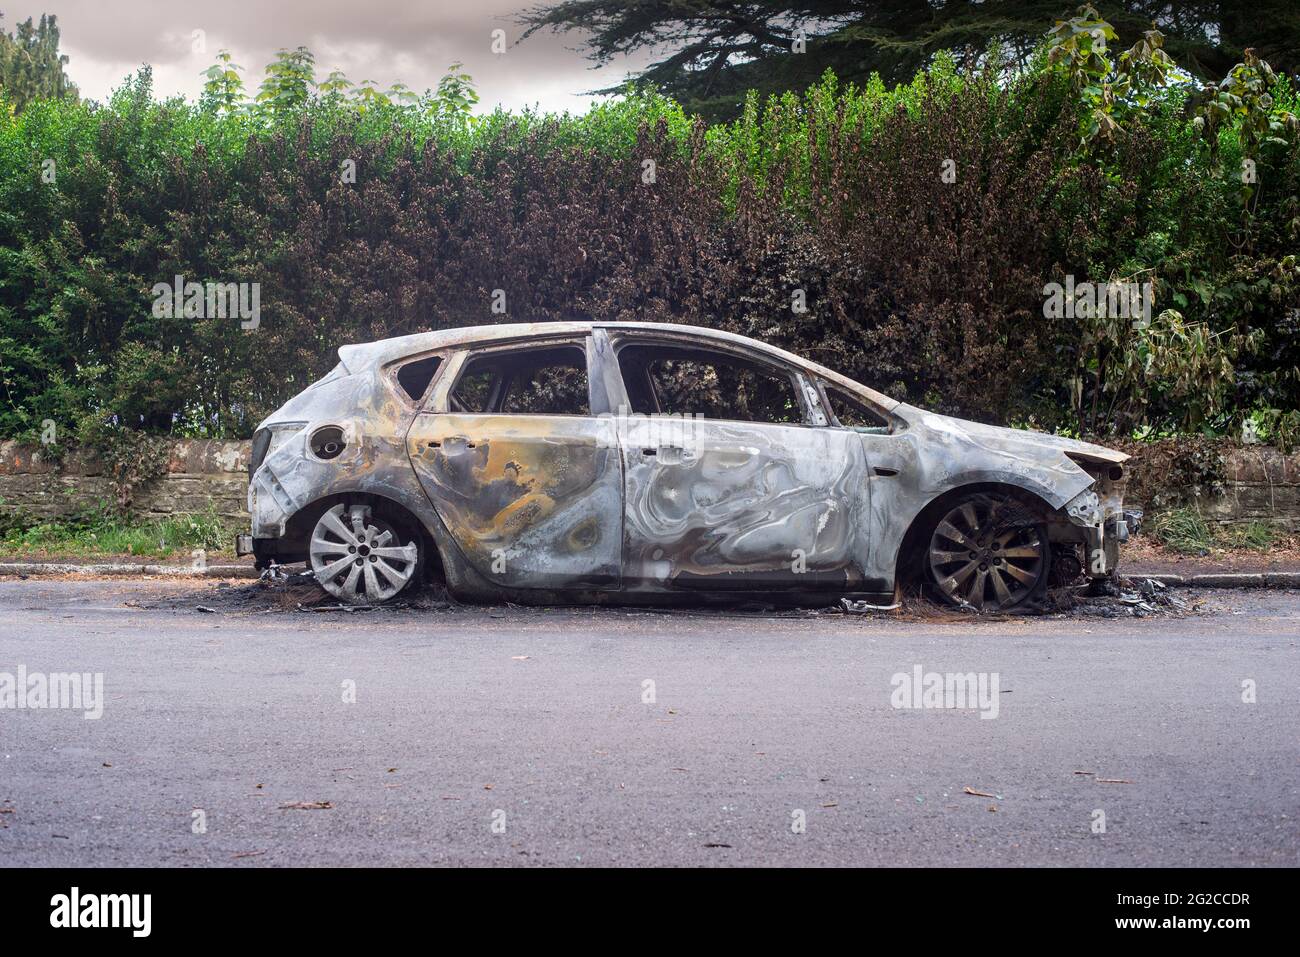 A burnt out Vauxhall Astra car abandoned in Cemetery Road in Southampton Stock Photo